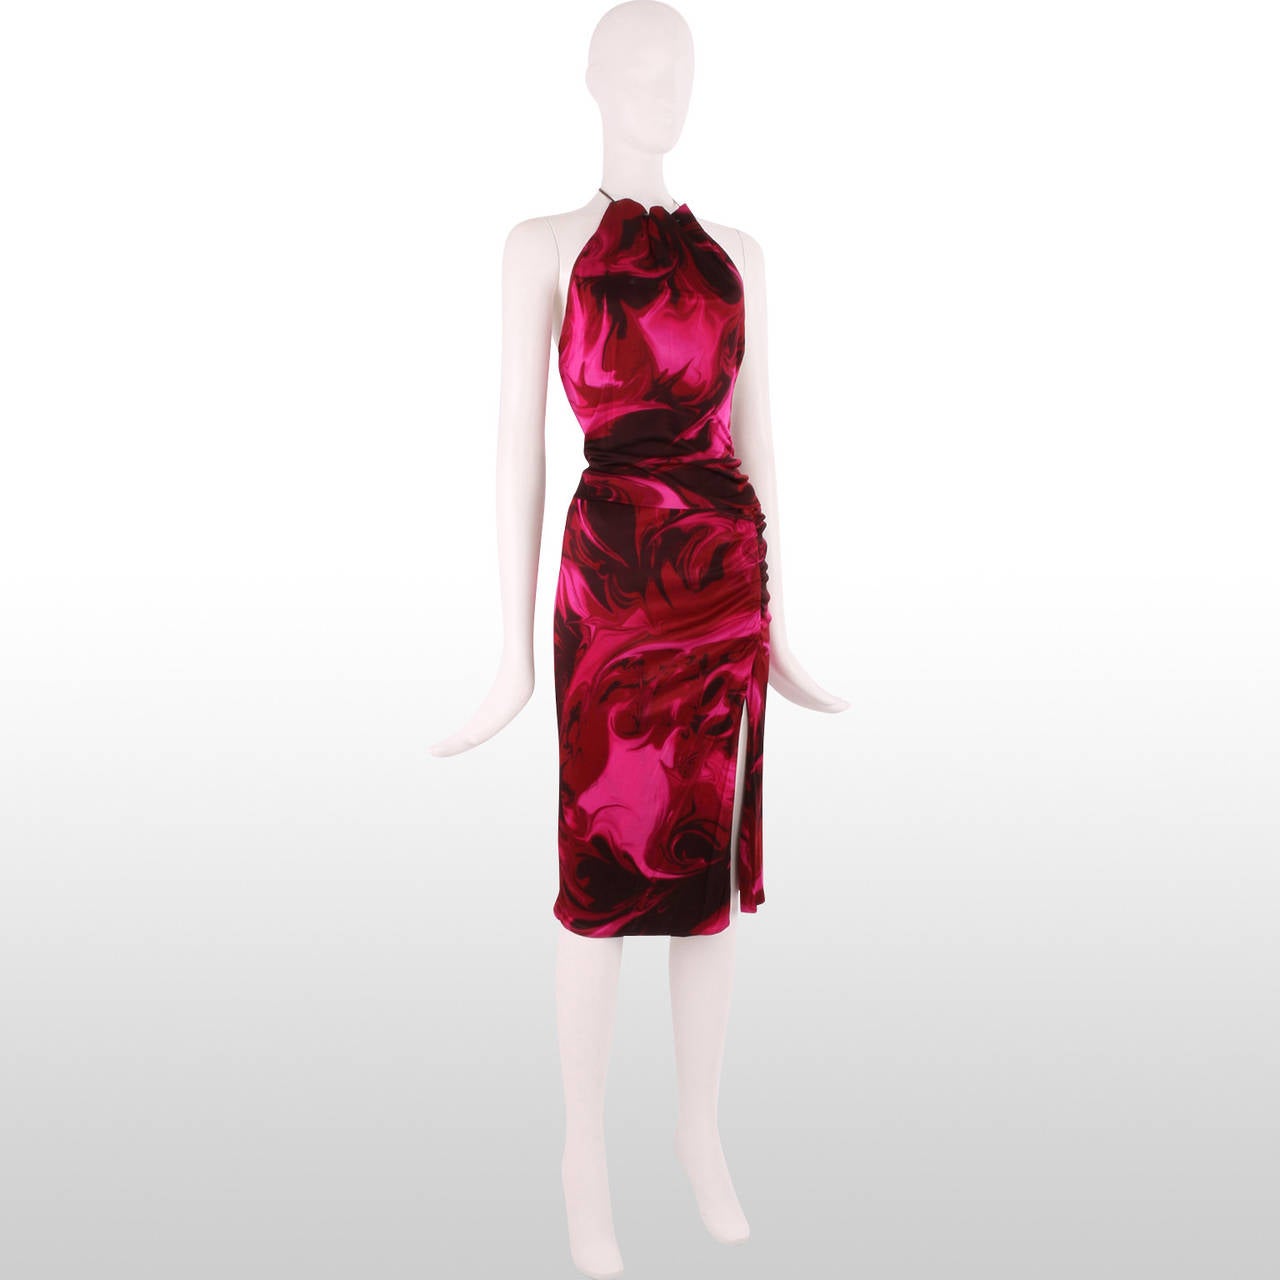 This two-piece by Gucci is composed of a cropped halter neck top and knee length side split skirt. The fabric is really what makes this piece special as the bold marble effect, swirl print in tones of rose pink brings real vibrancy to the outfit.